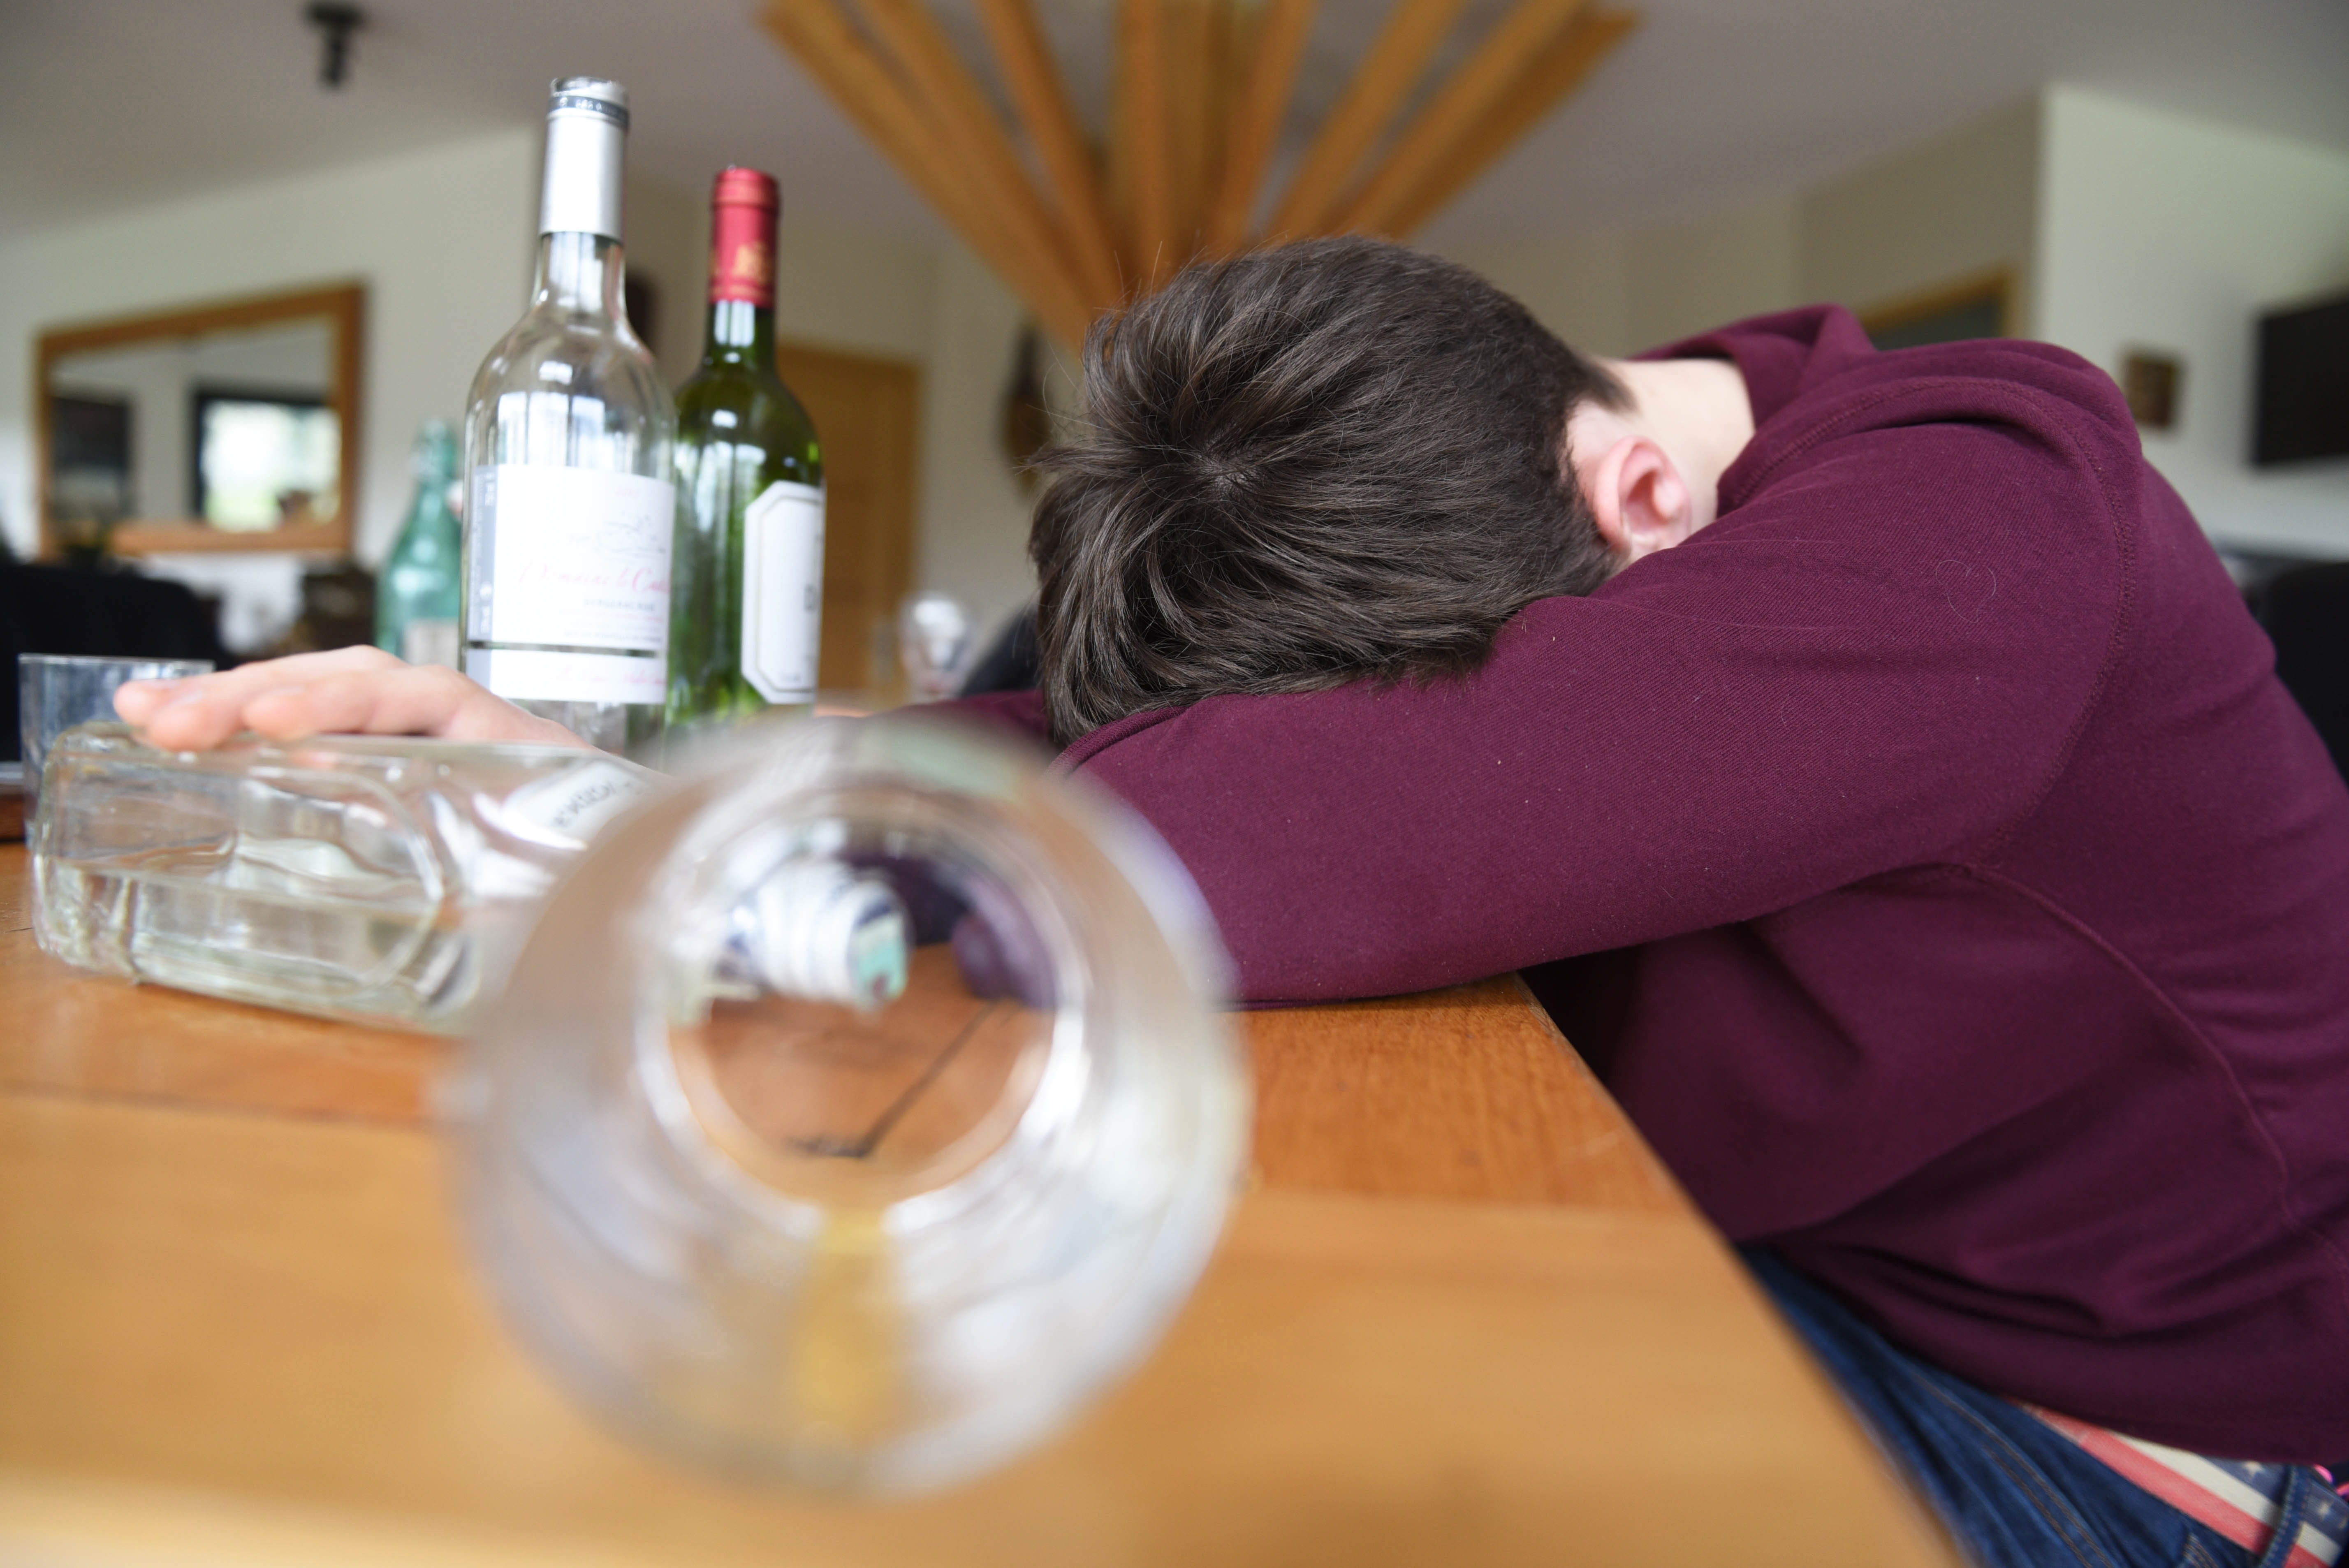 Teen Drinking Reaches Lowest Point in 25 Years, CDC Says | Time